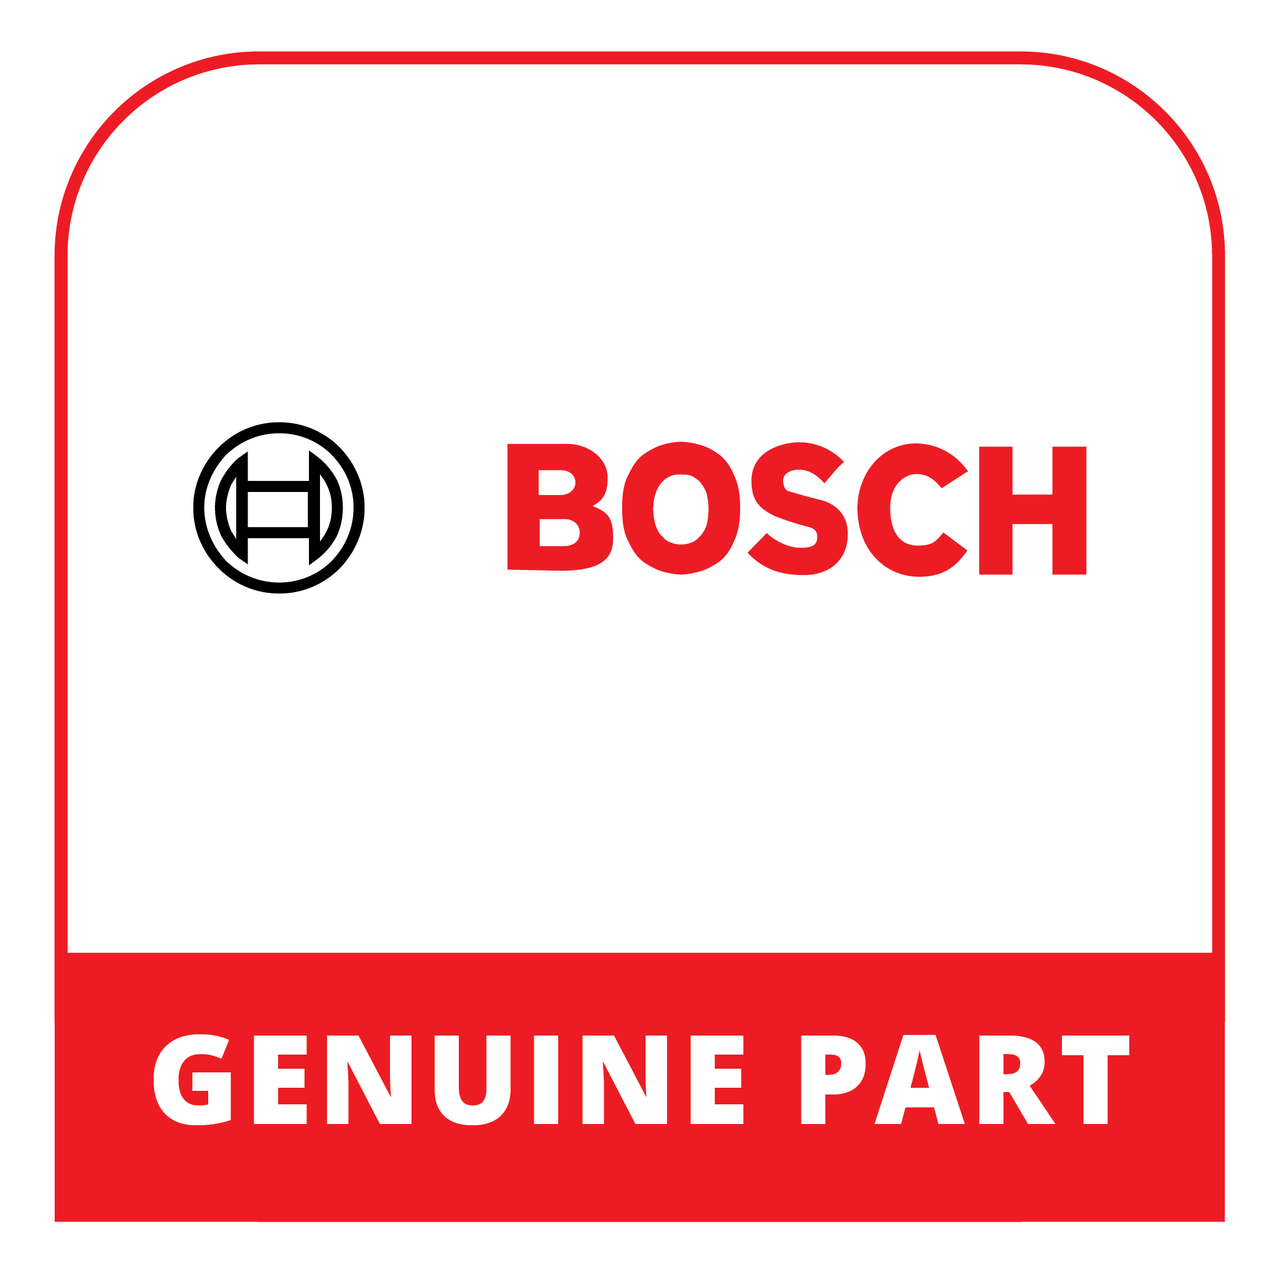 Bosch (Thermador) 18083175 - Installation Instructions - Genuine Bosch (Thermador) Part